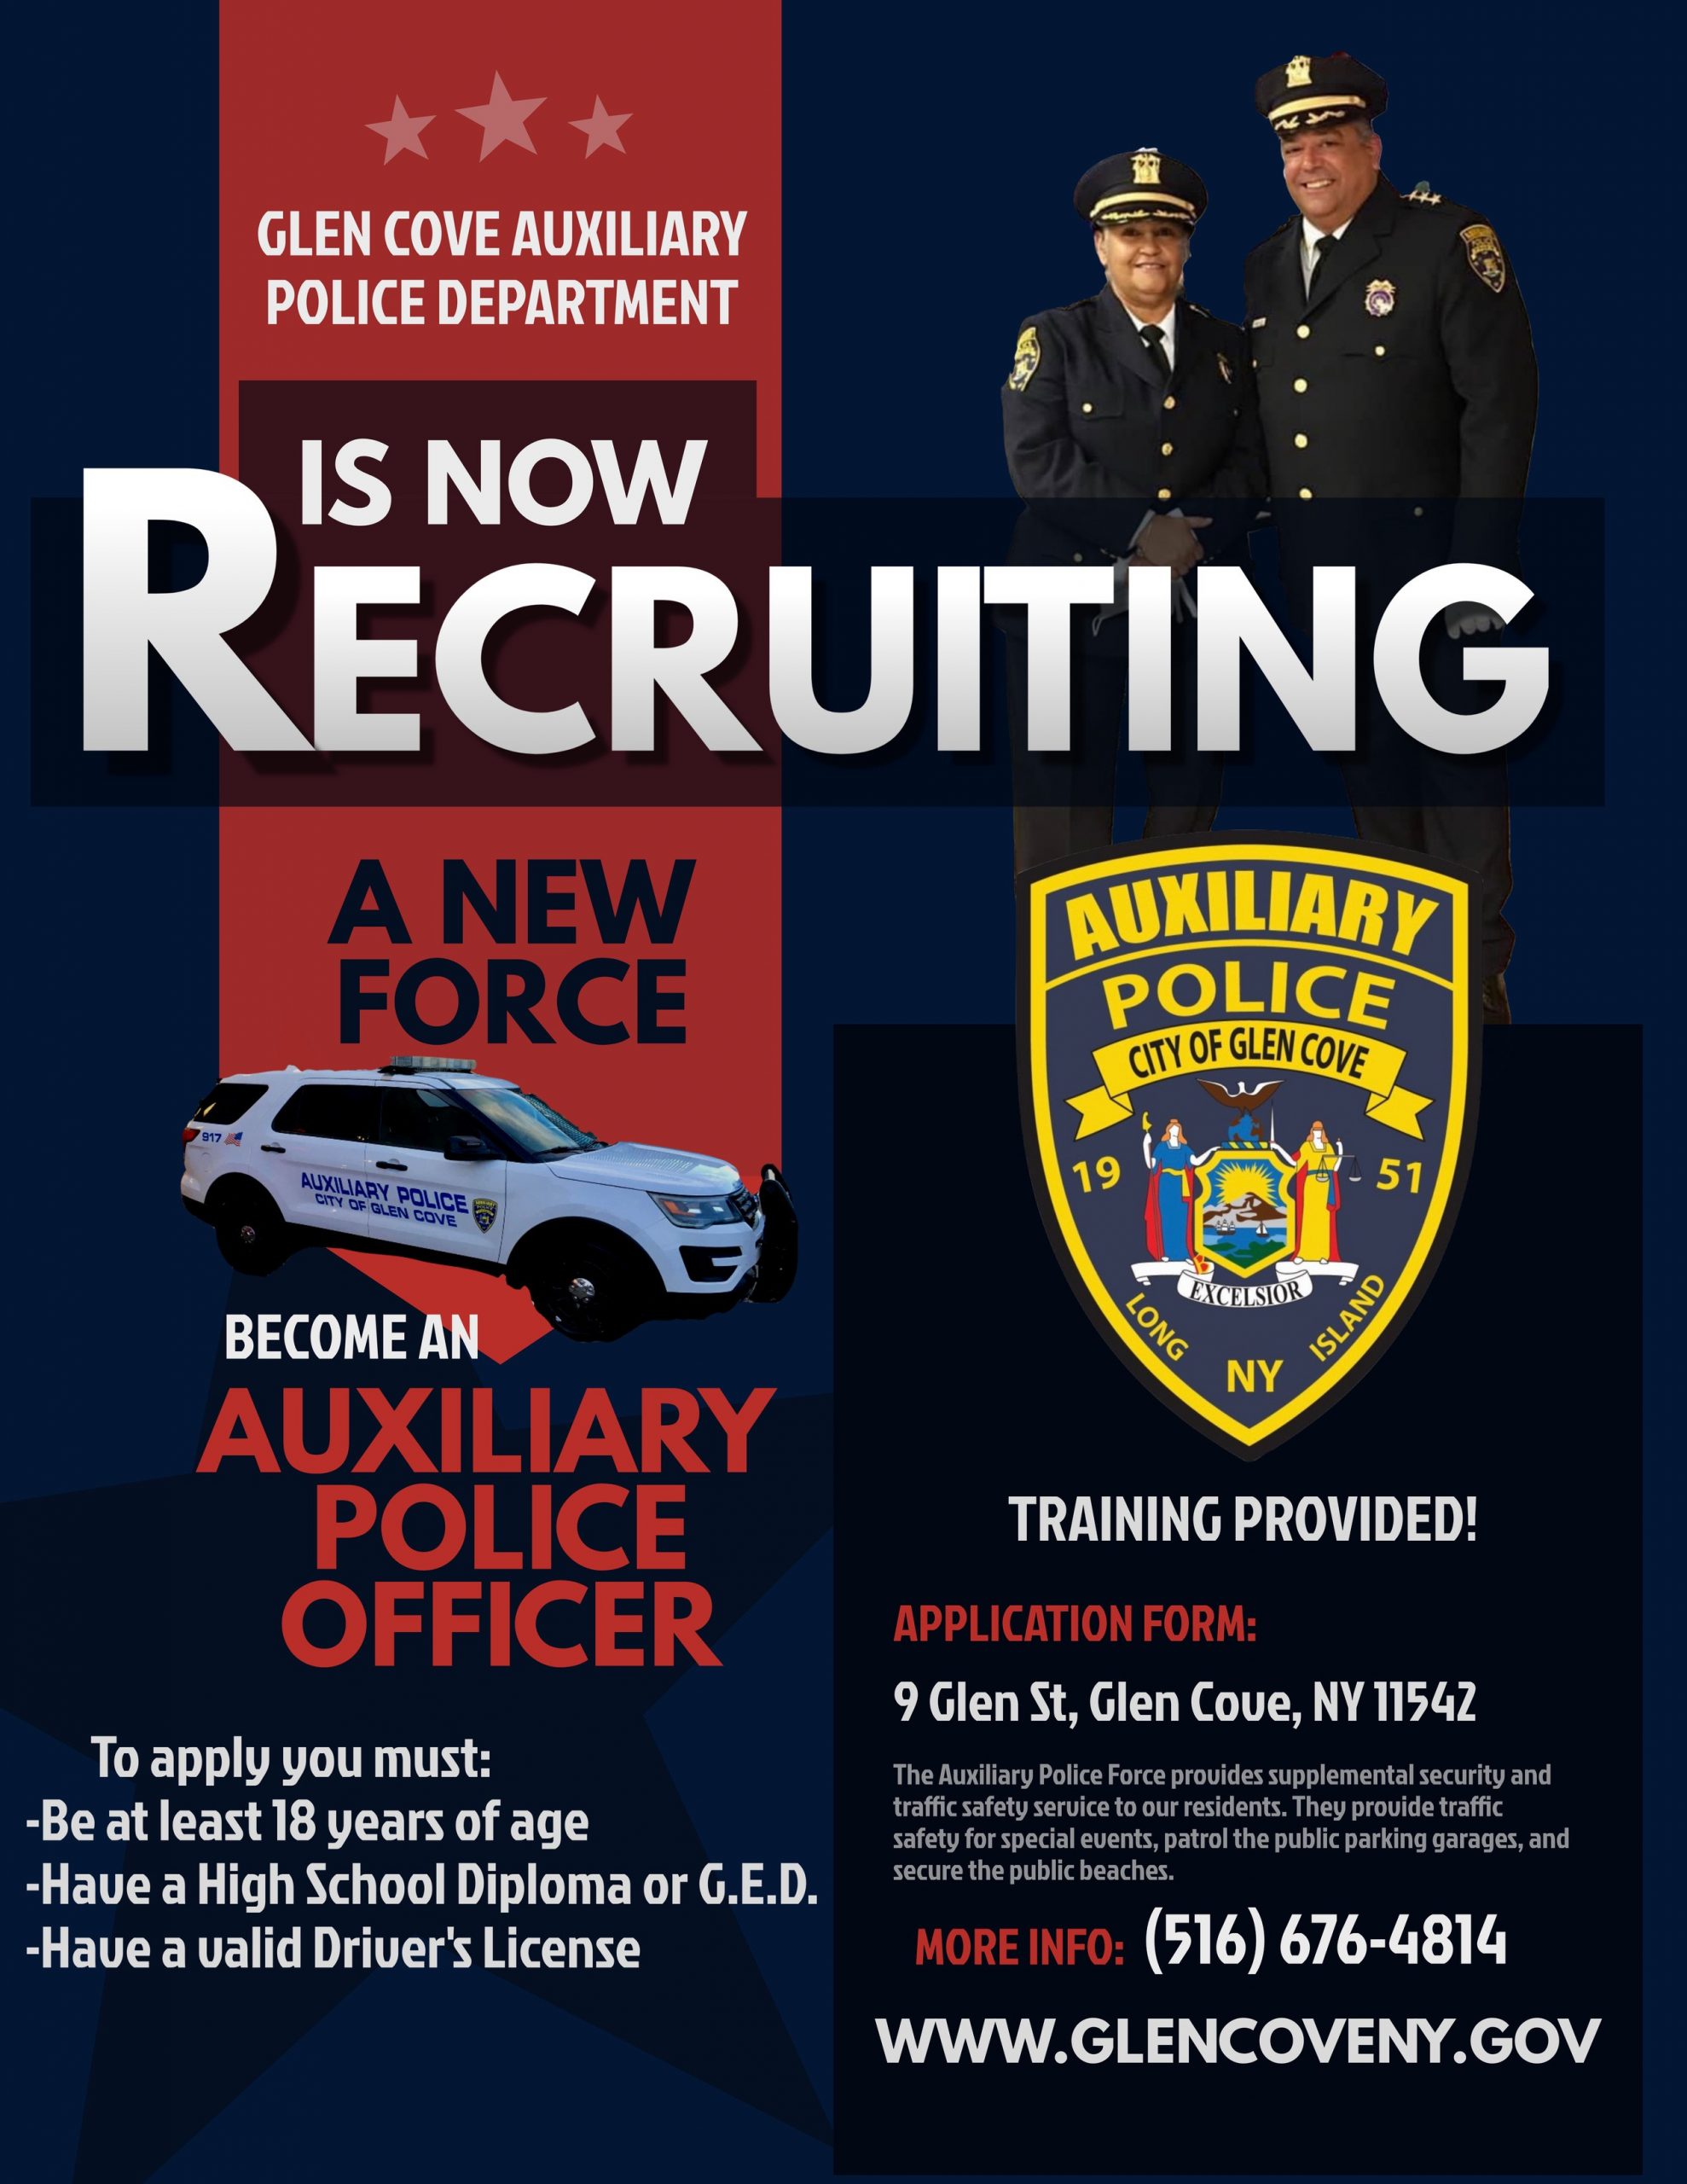 Auxiliary-Police-Ad-final-version-4-8-2022